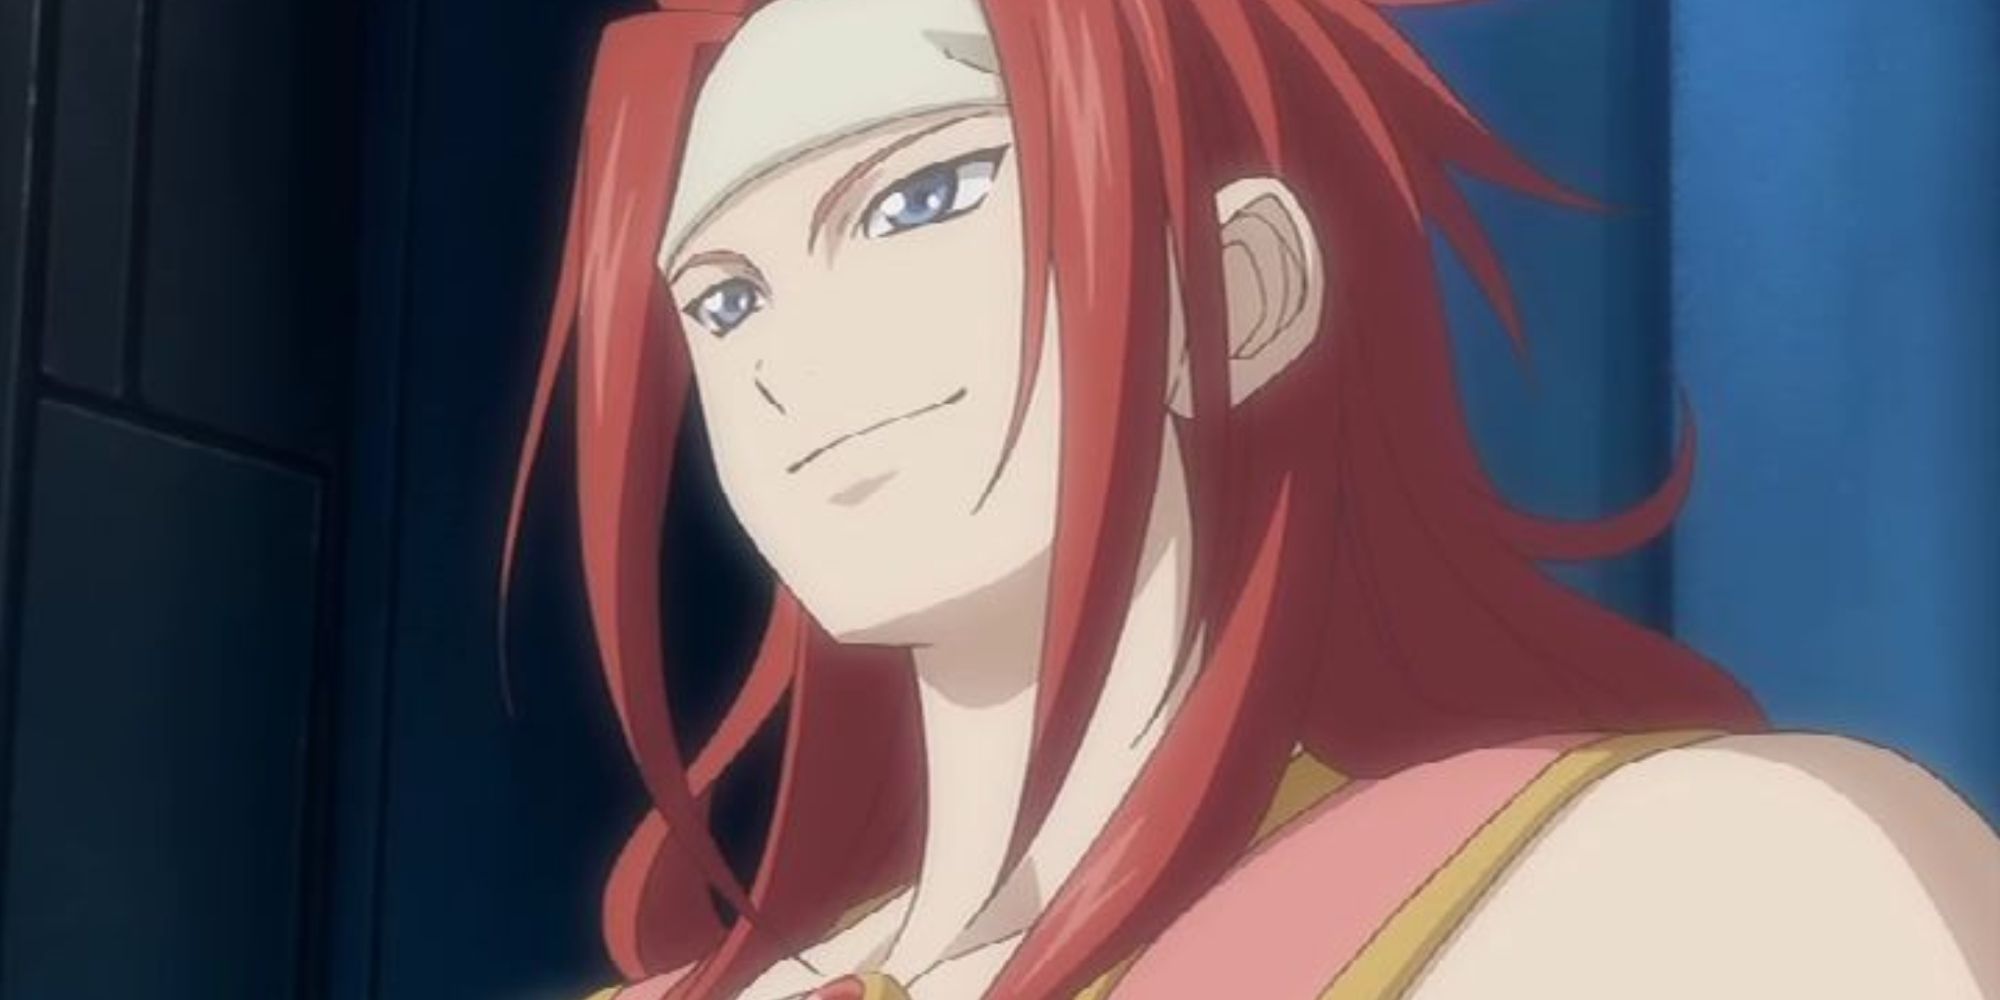 An image of Zelos from Tales of Symphonia Remastered, looking ahead with a grin on his face.